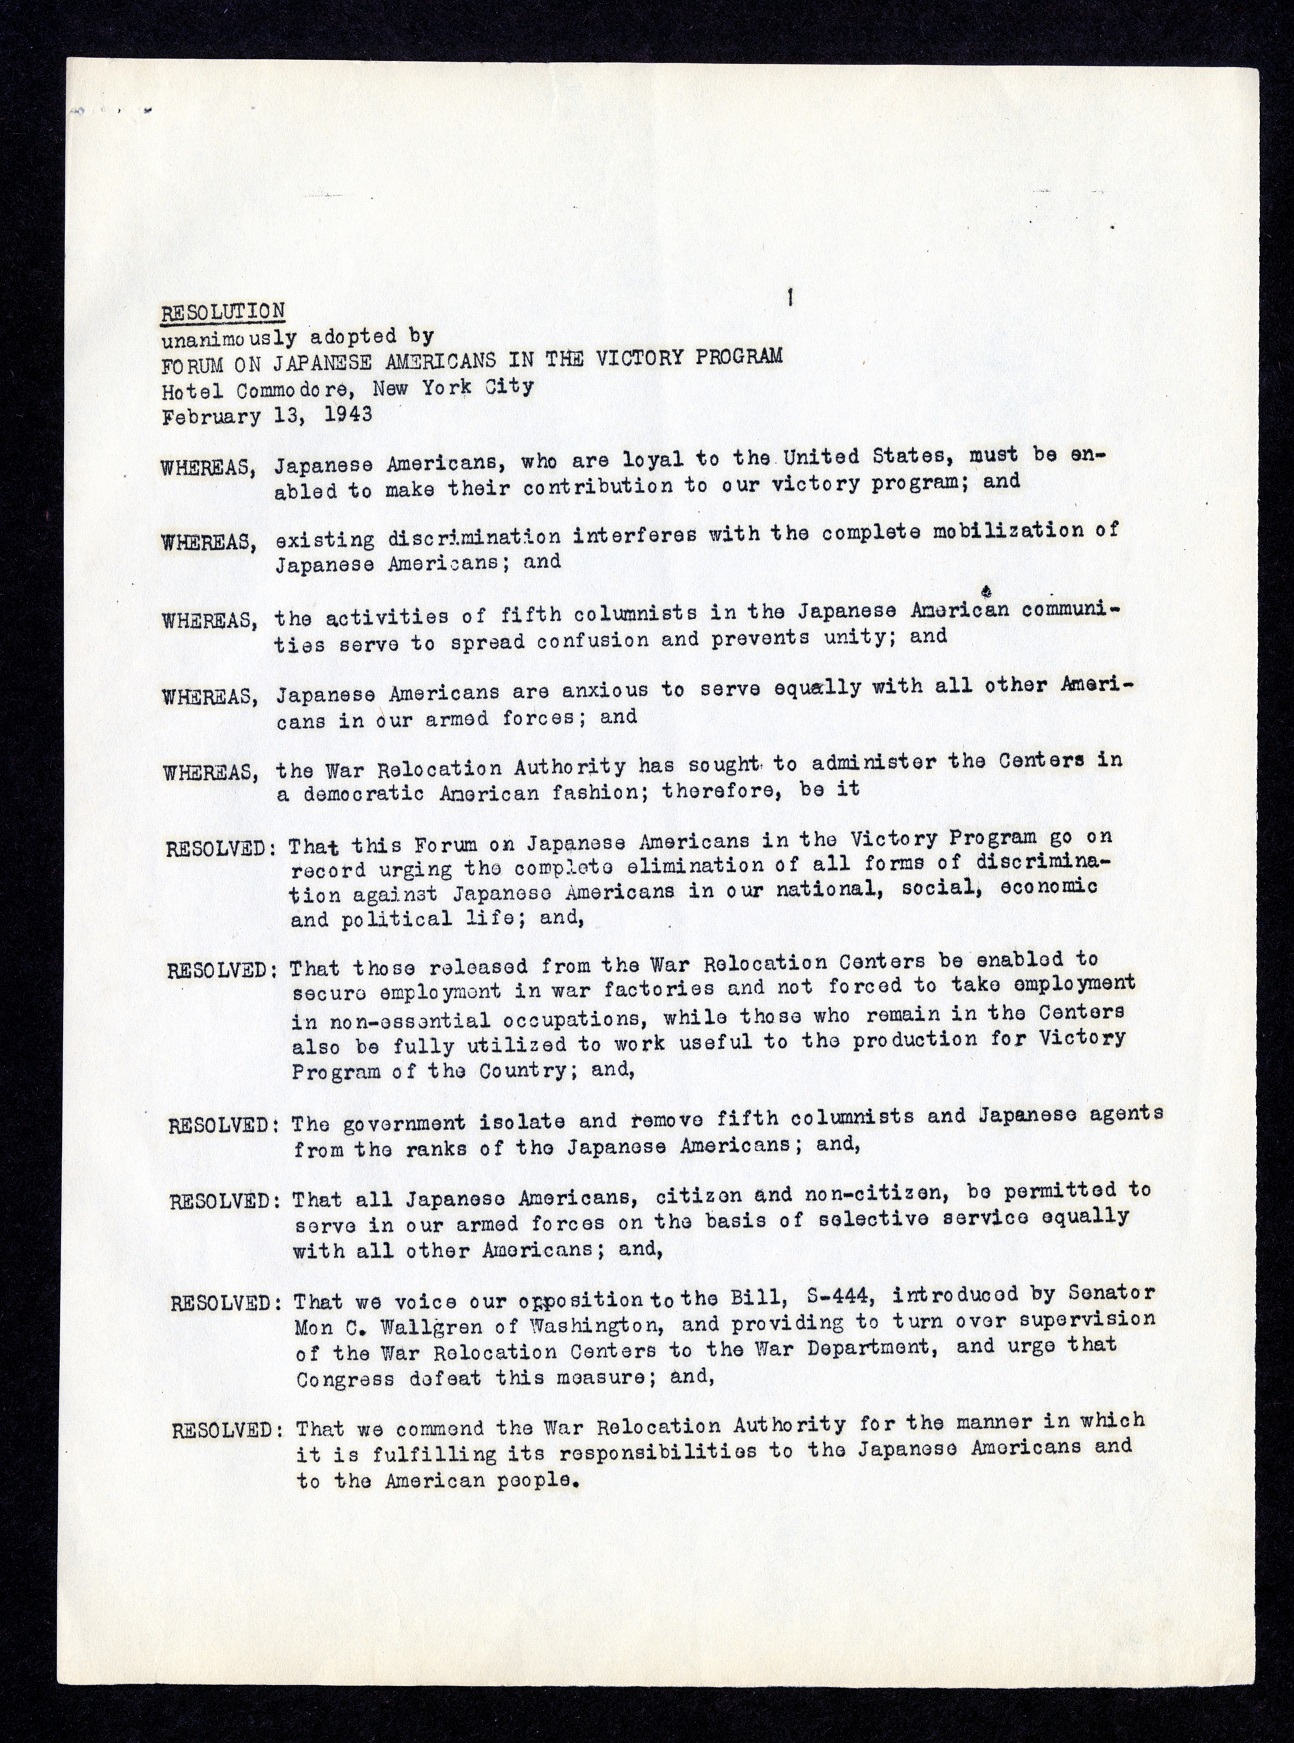 Resolution adopted by the Forum on Japanese Americans in the Victory Program, 1943 (Gilder Lehrman Institute, GLI09692)